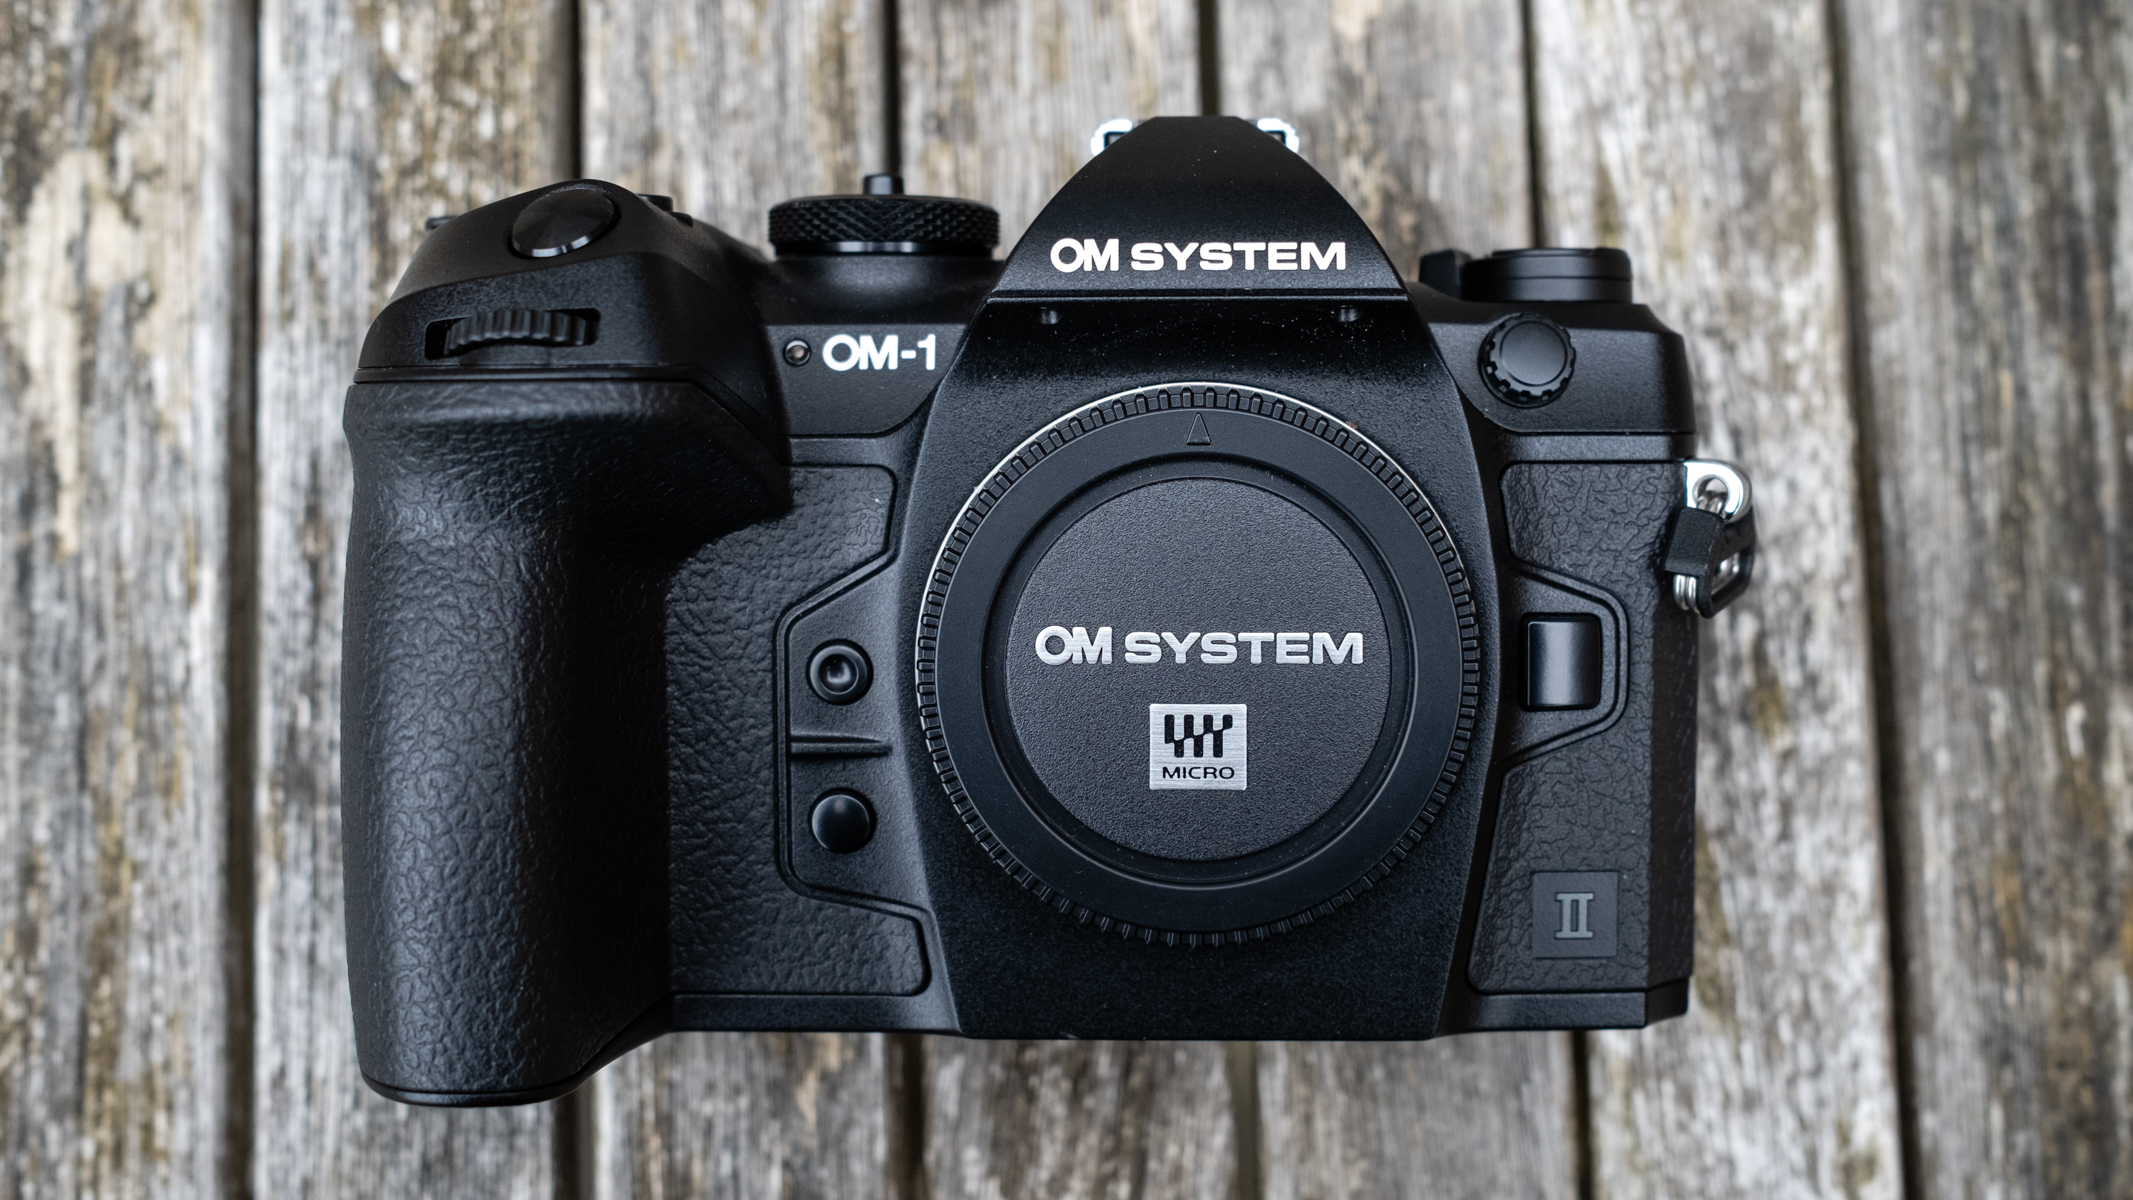 OM System OM-1 II review: the pint-sized powerhouse